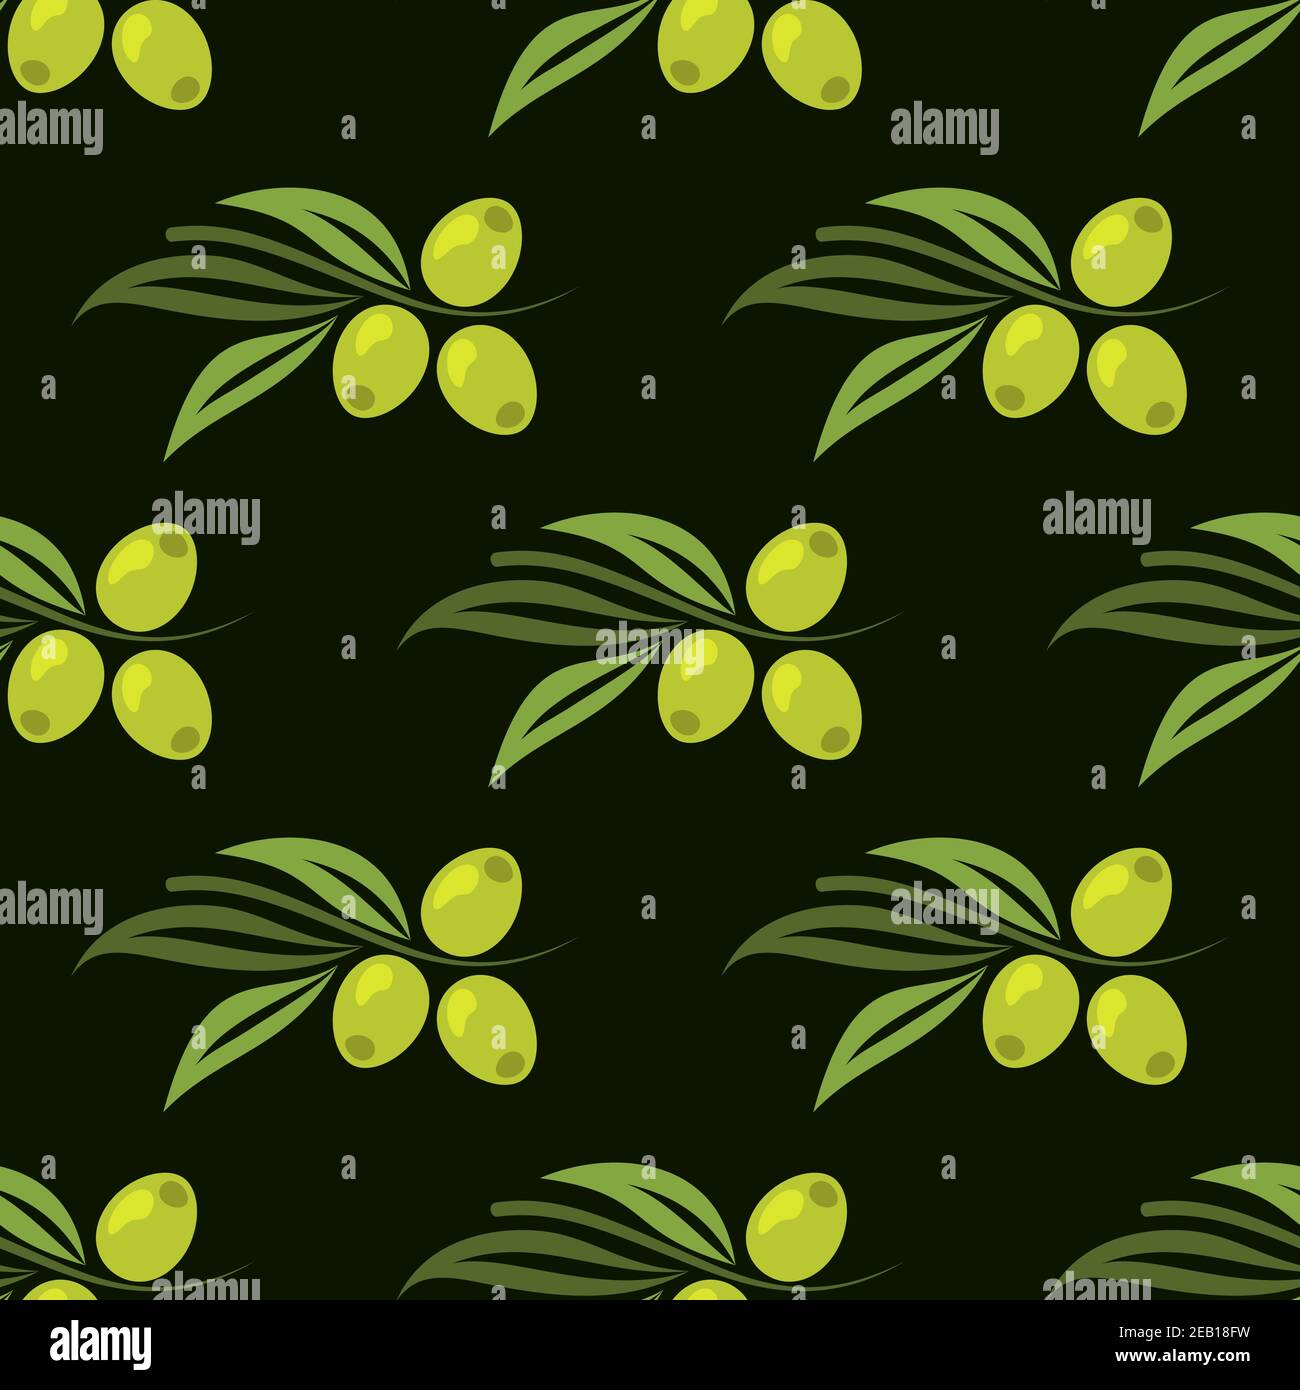 Seamless olive pattern with green olives on branch with elongated leaves on dark green background Stock Vector